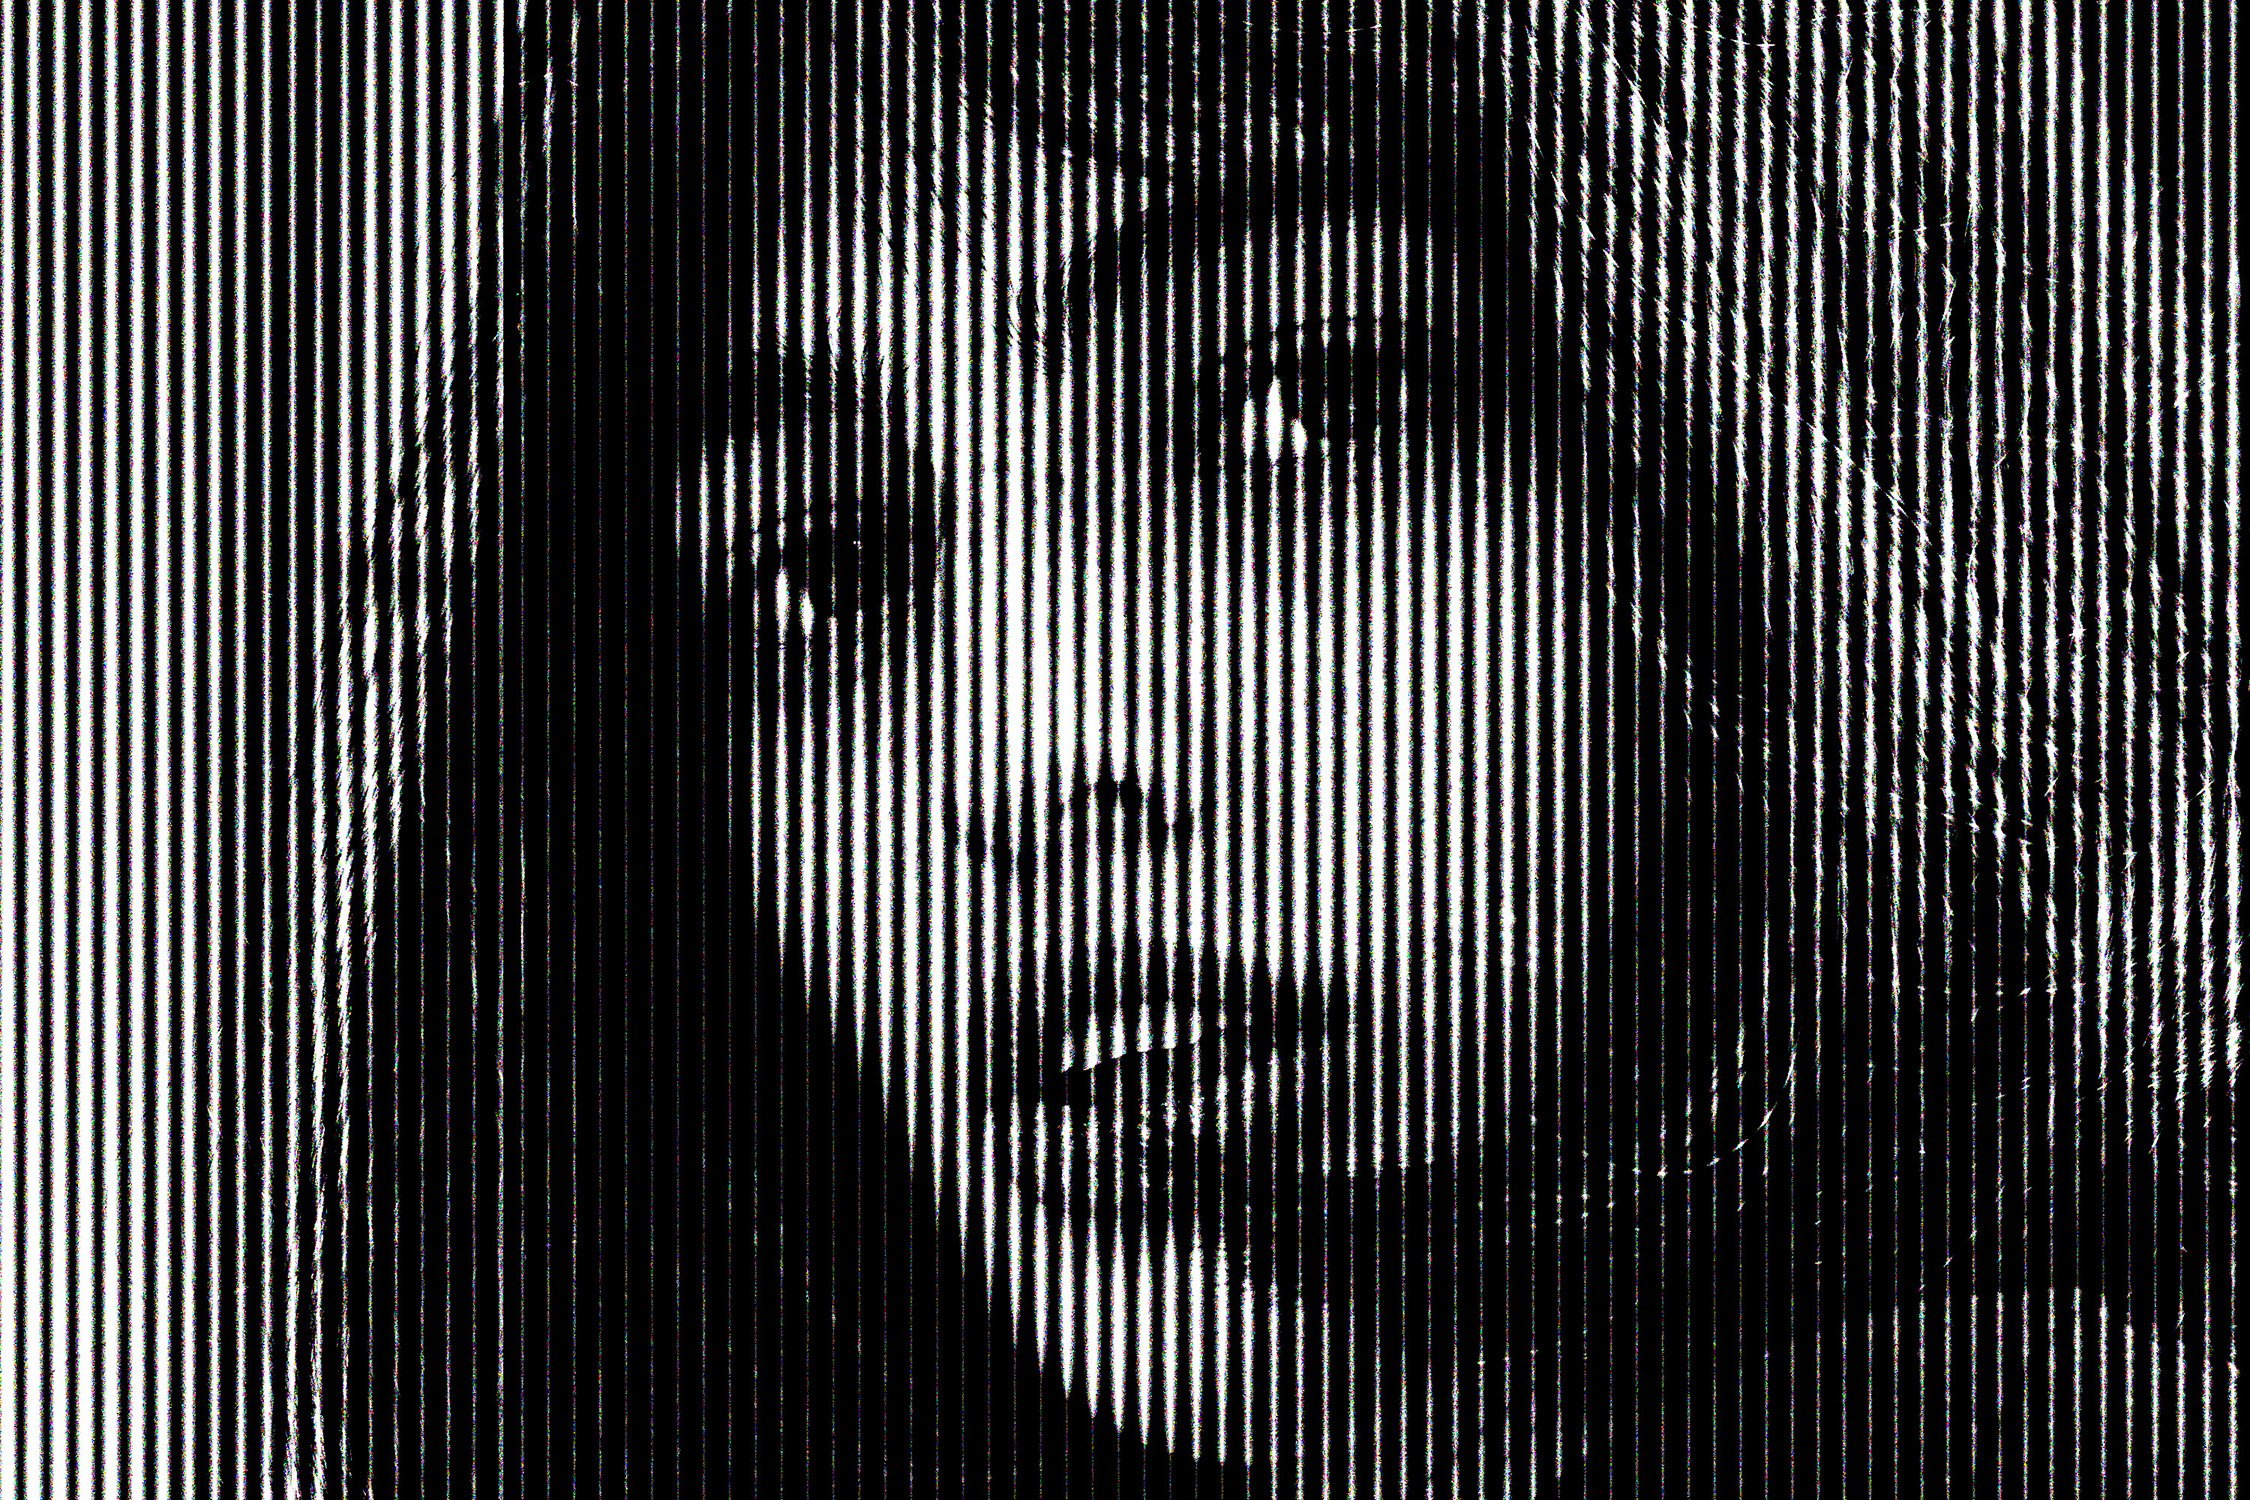 Halftone Patterns Poster Effectpreview image.